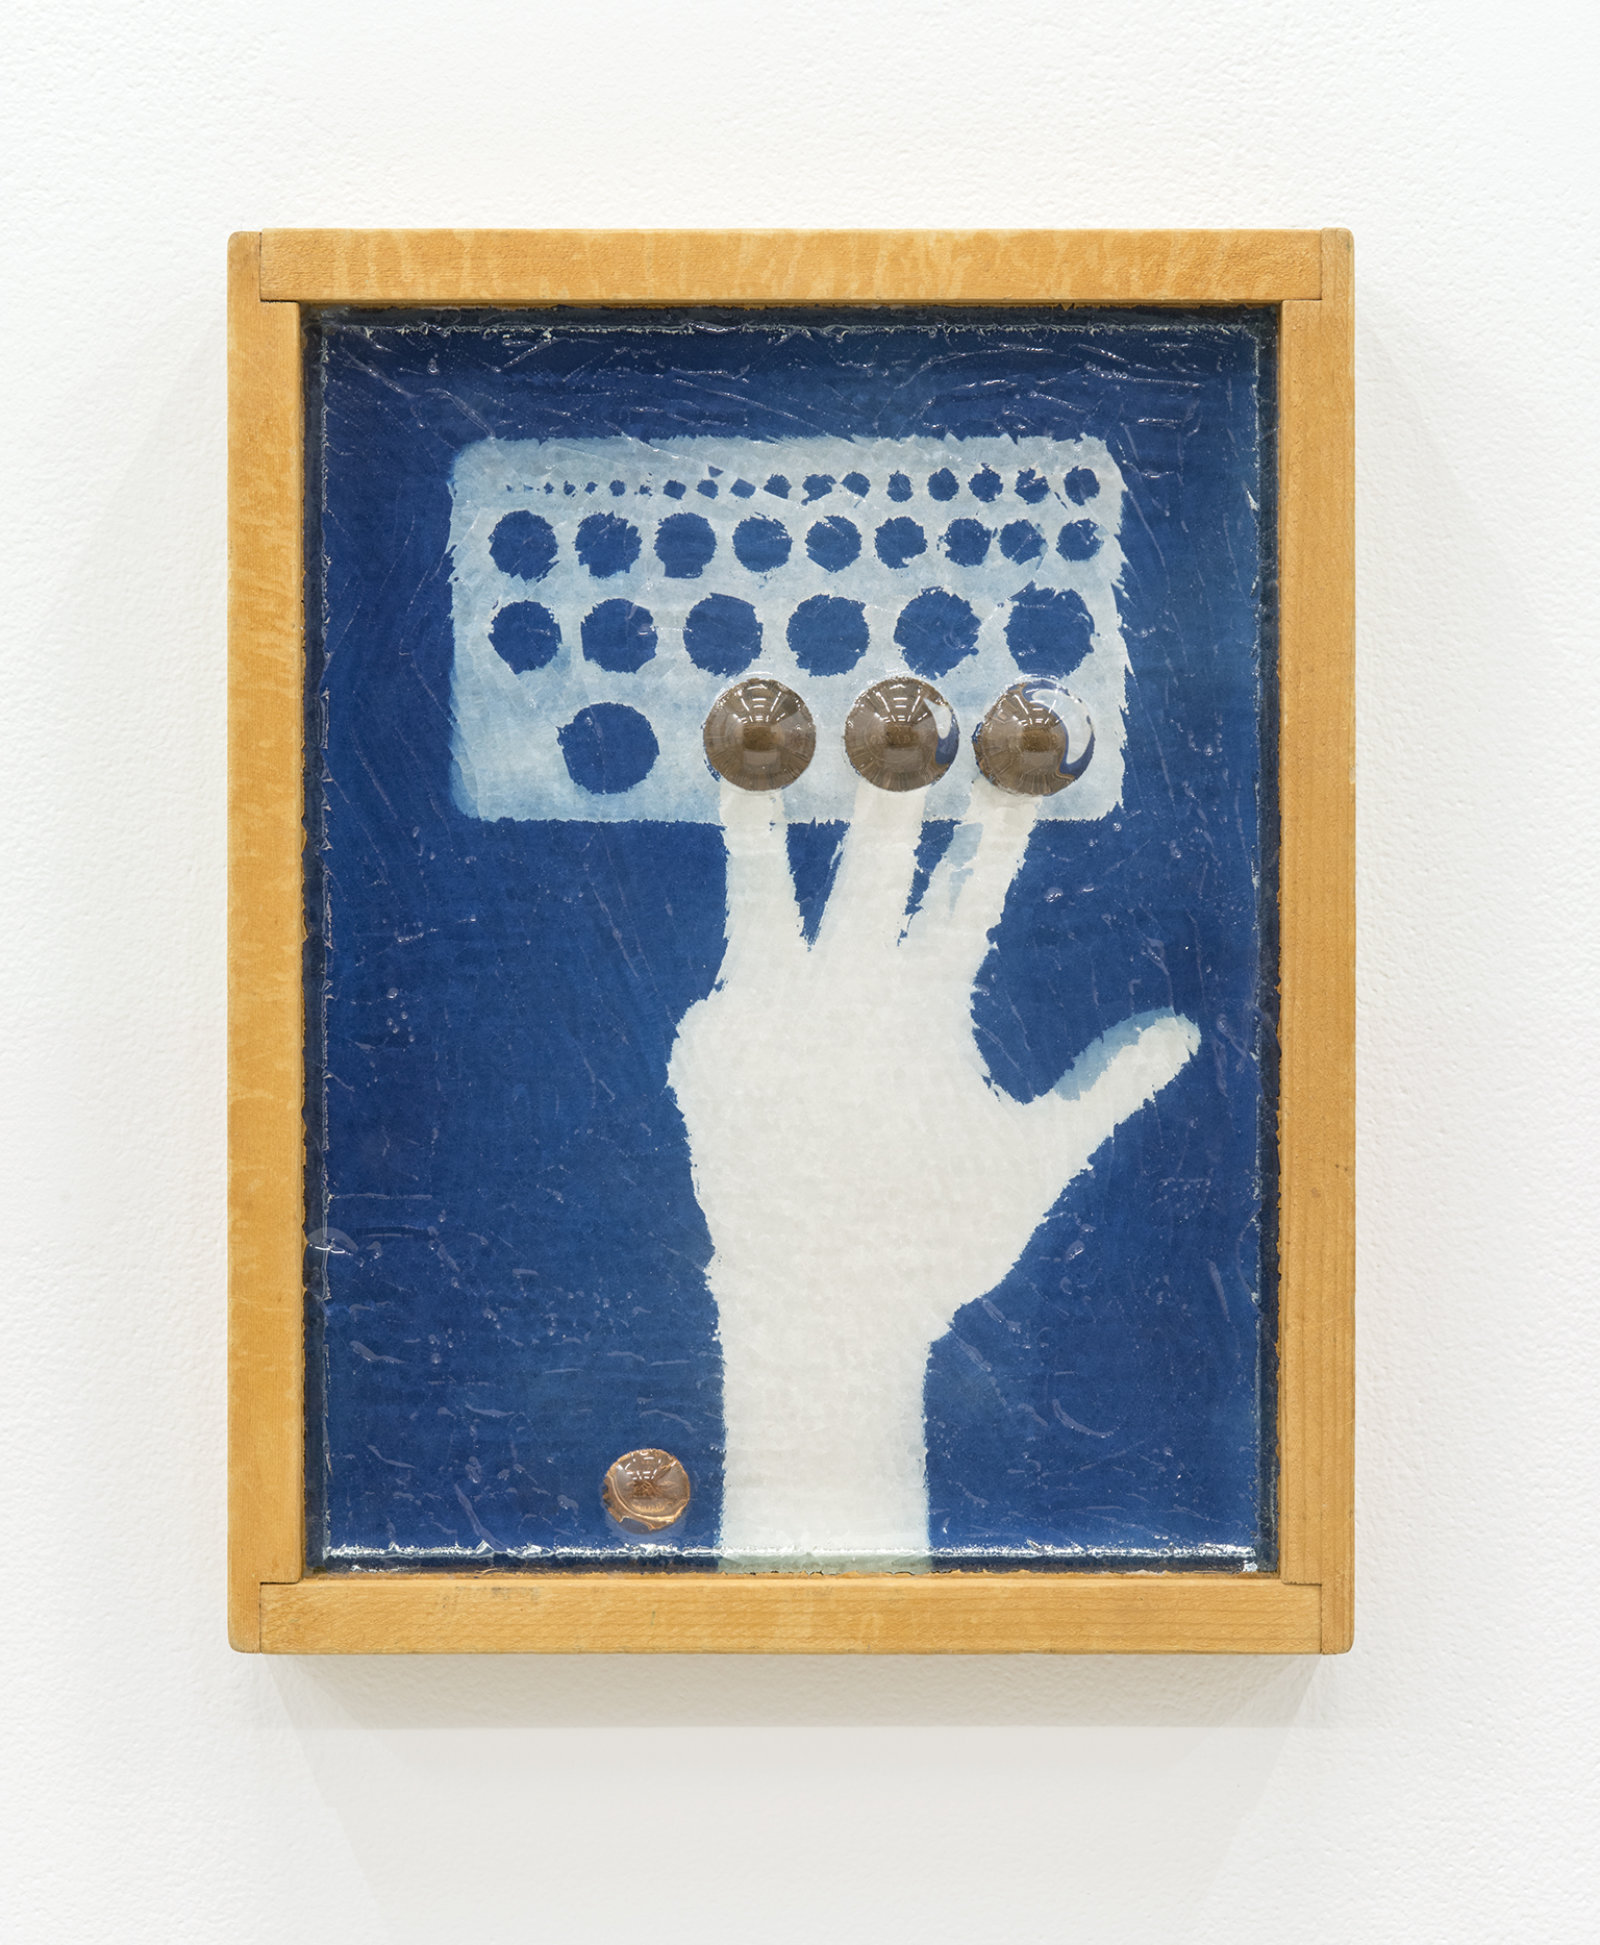 Kasper Feyrer, 2012, 1913, 1914, 1915..., 2013, custom fused glass, rust stained wood frame, canadian pennies, mirror inset, magnets, cyanotype, 15 x 12 in. (38 x 30 cm)